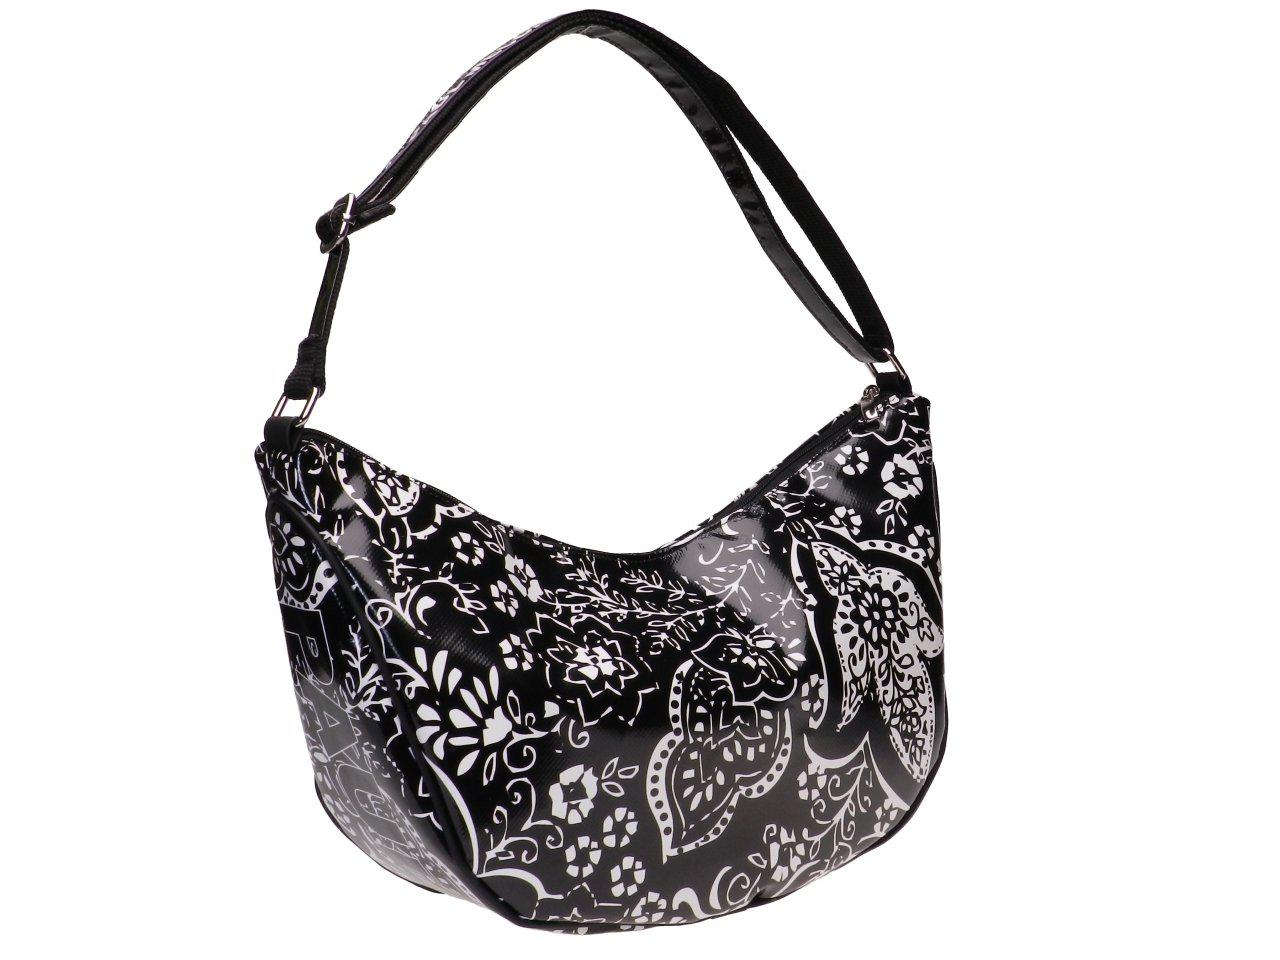 HALF-MOON BAG BLACK AND WHITE FLORAL FANTASY. SPLIT MODEL MADE OF LORRY TARPAULIN. - Limited Edition Paul Meccanico